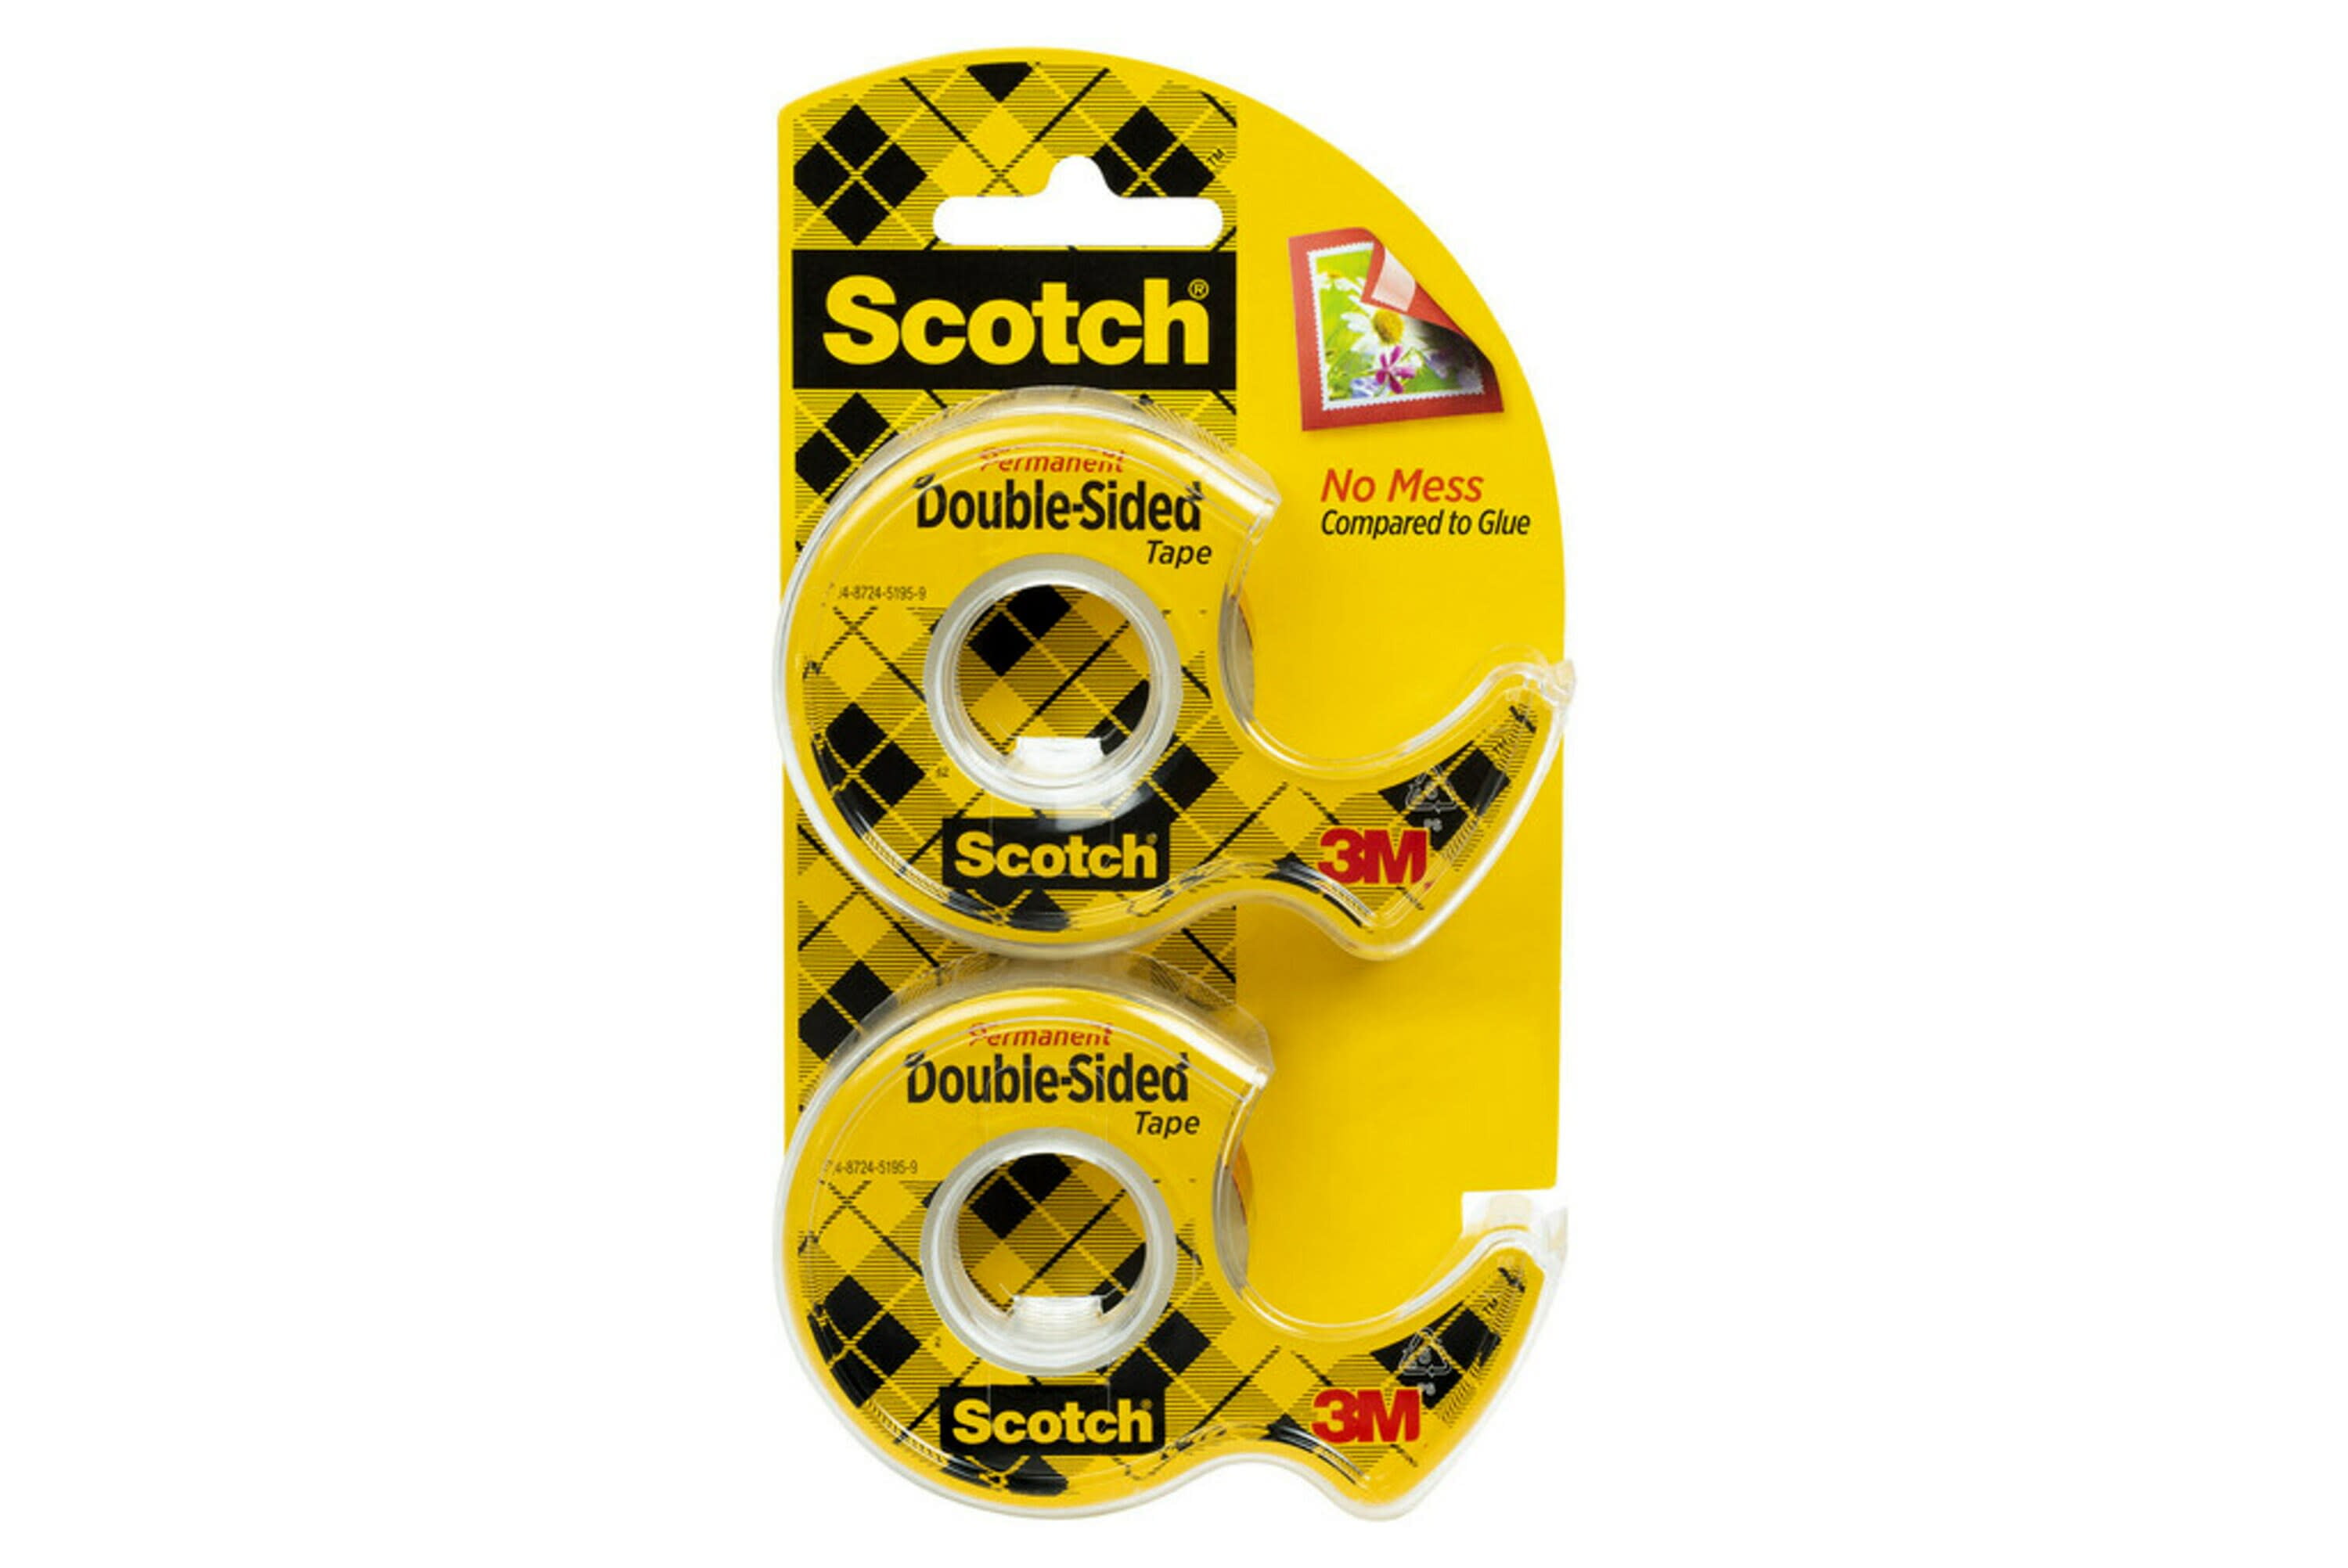 Scotch Double Sided Permanent Tape Dispensers, 1/2"x400", 2 Dispensers